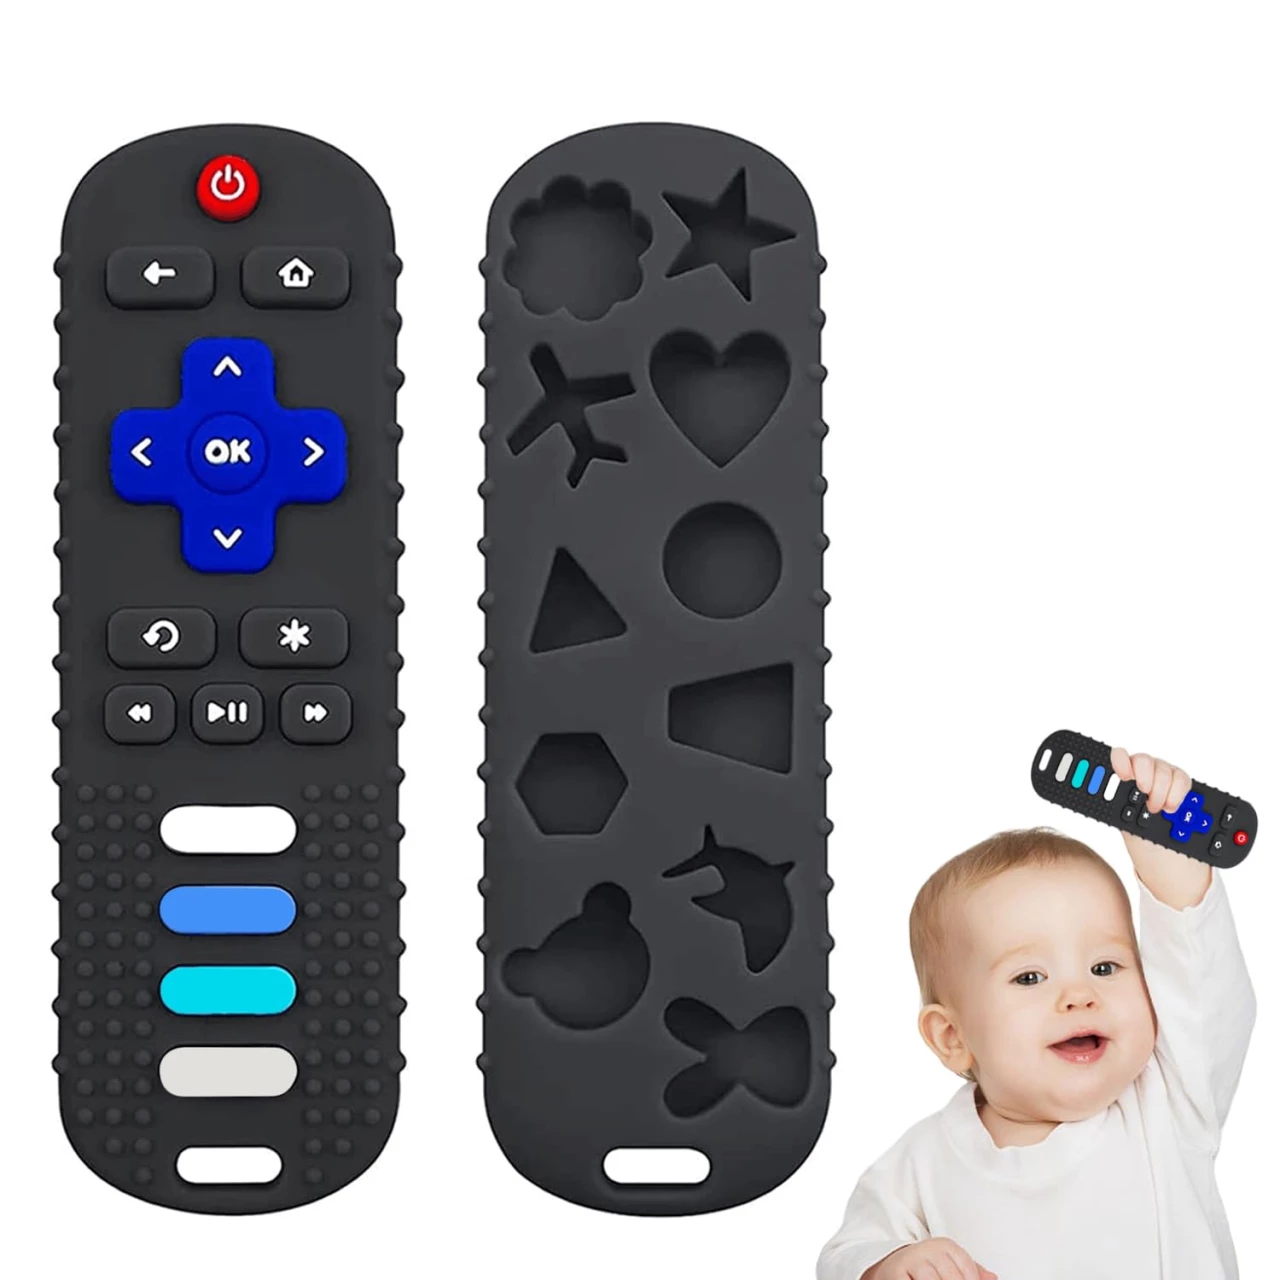 YAPROMO Silicone Teething Toys, Remote Control Shape Teething Toys for Babies 6-18 Months, Remote Teether Toys for Toddlers Infant, Baby Silicone Chew Toys BPA Free